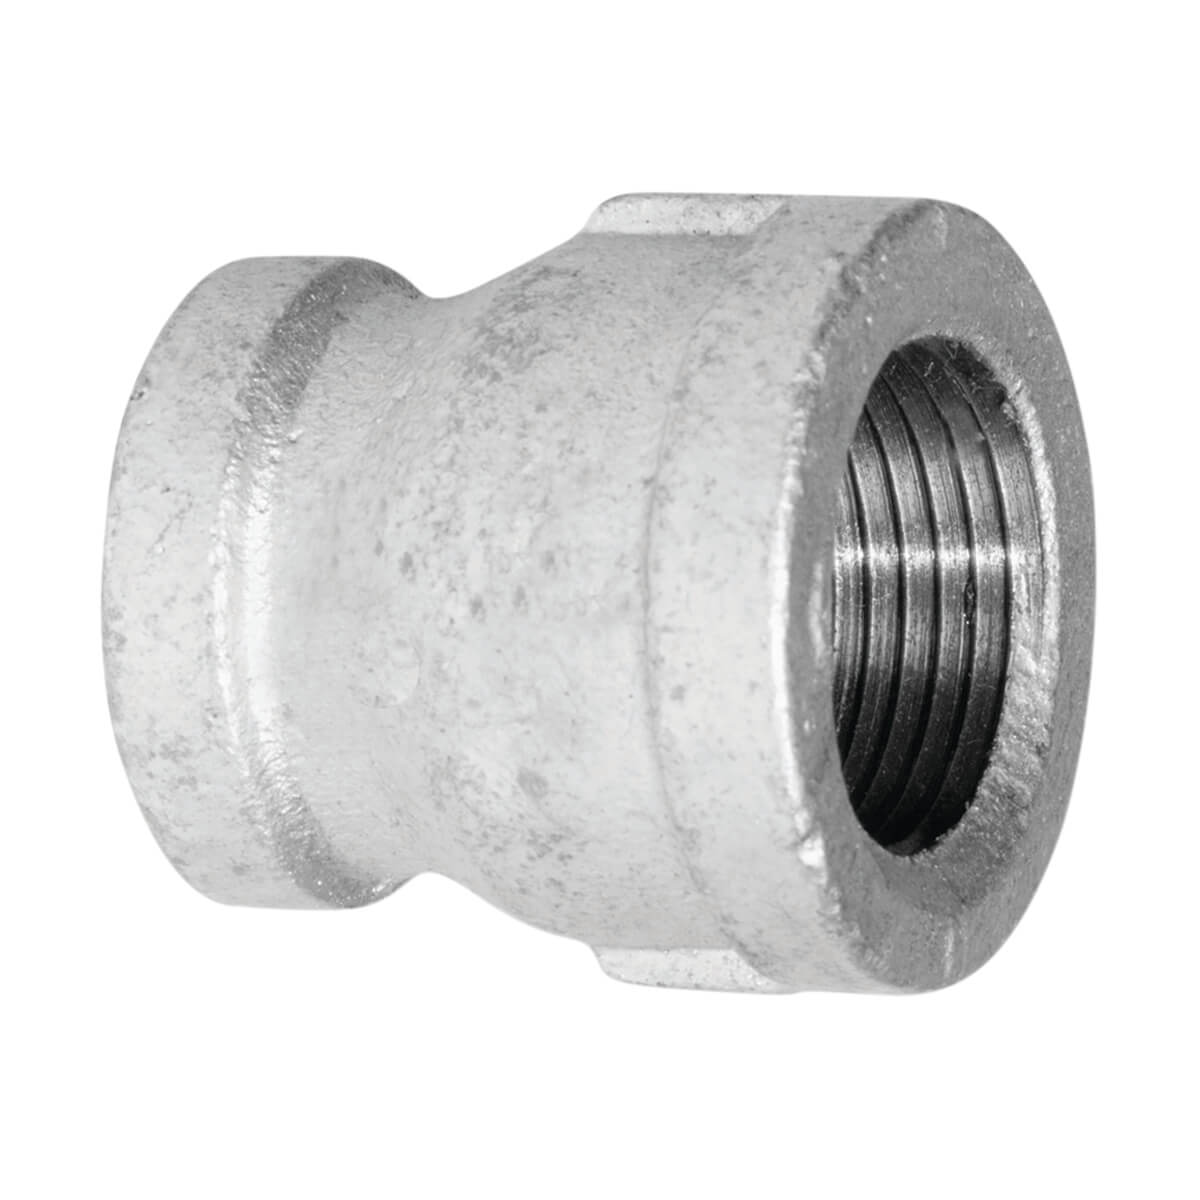 Fitting Galvanized Iron Coupling - 1/4-in x 1/8-in